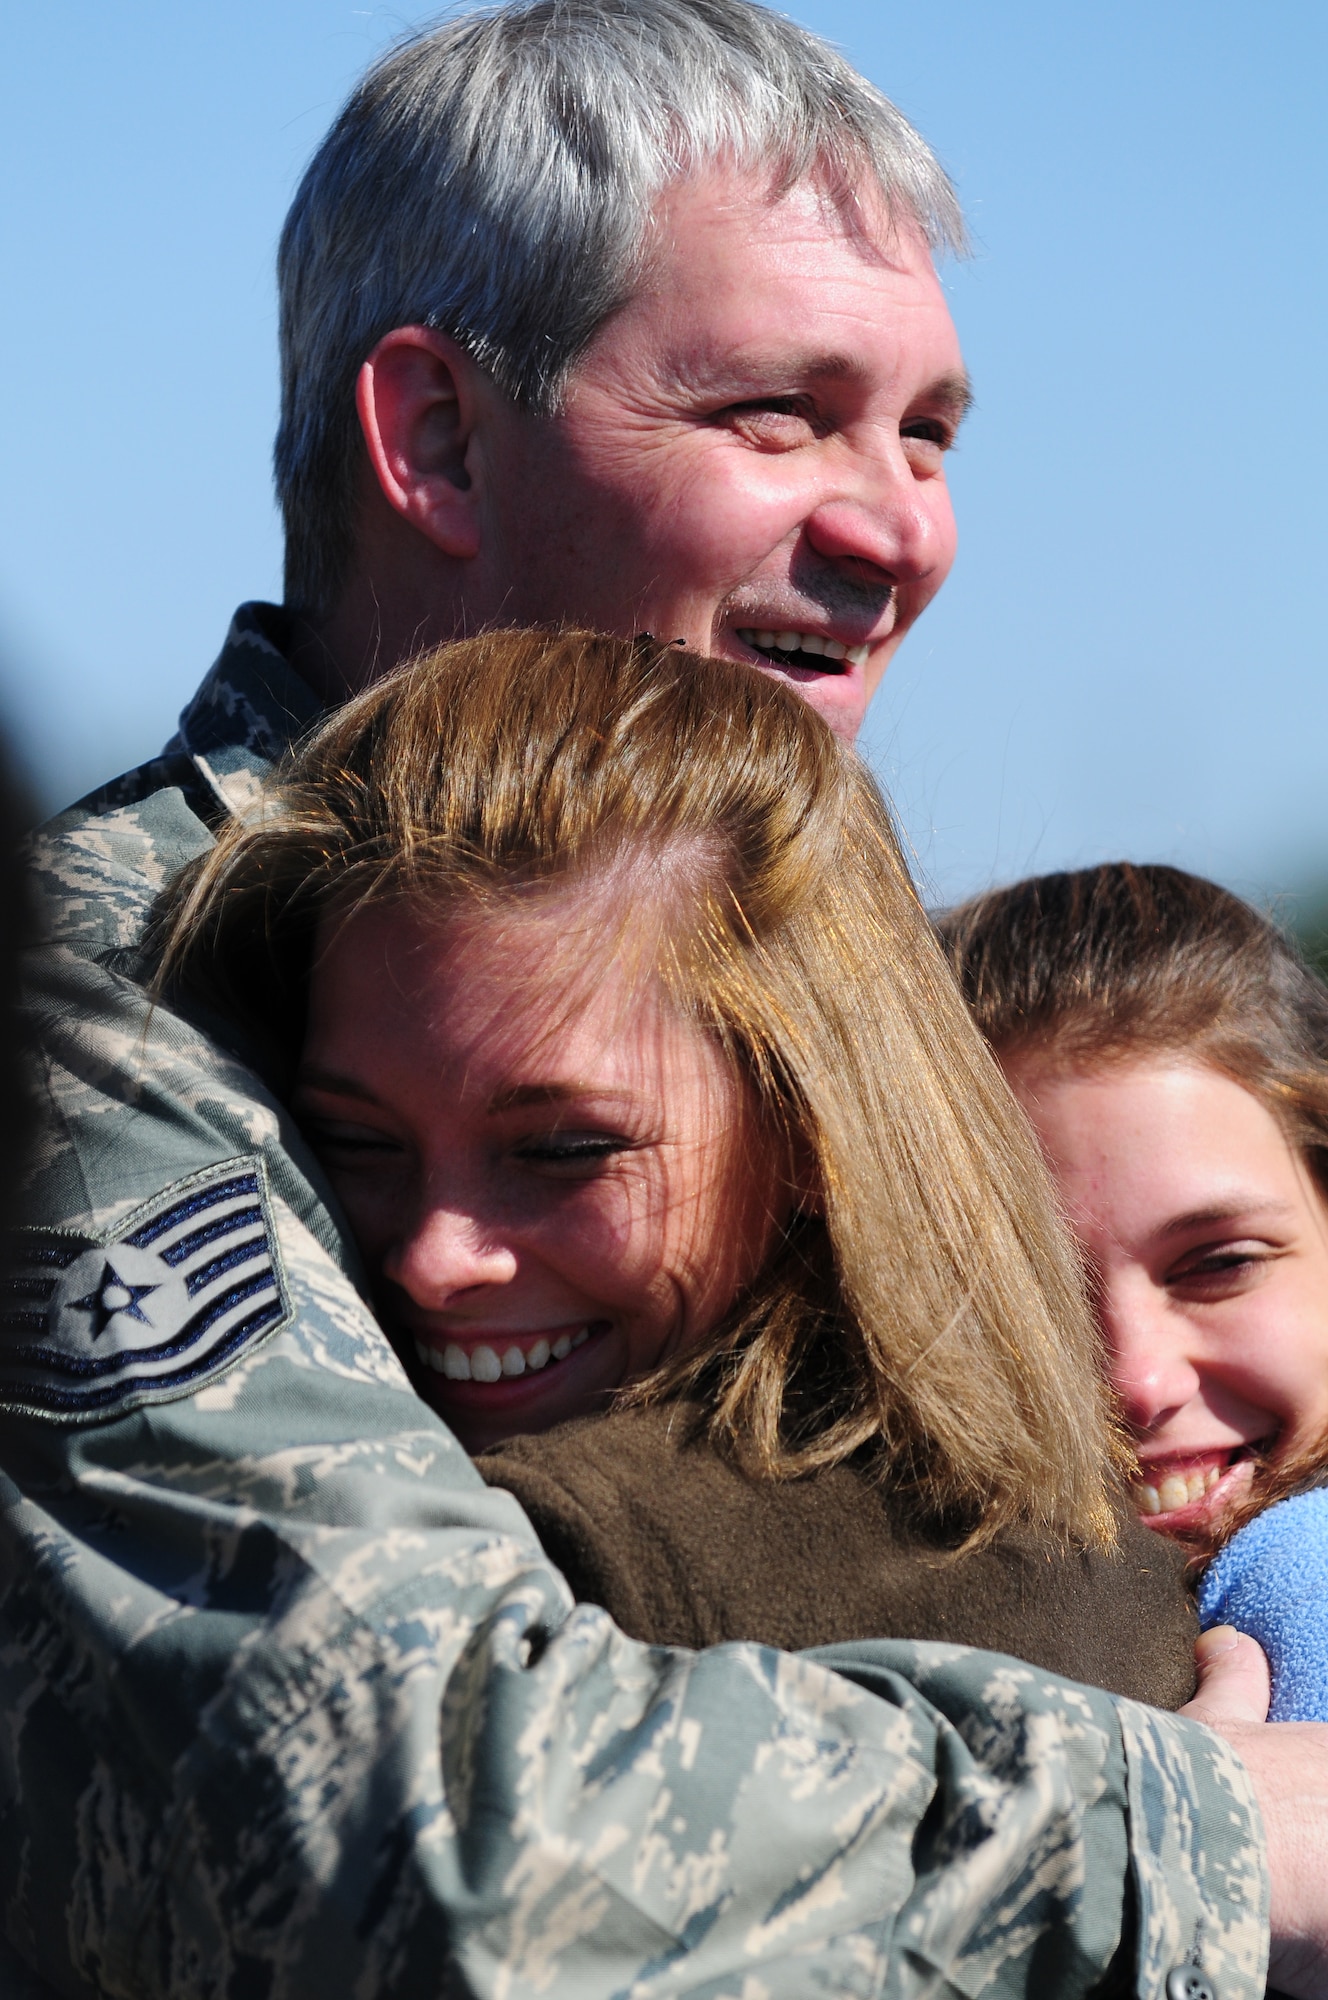 Stepping off a C-130 at Maxwell Feb. 21,Tech. Sgt. Jeff Harris receives an enthusiastic welcome from his daughters, Amanda and Brittnie. Sergeant Harris was one of 60 aircrew and maintenance members of Maxwell’s 908th Airlift Wing that deployed for three weeks to Europe, flying missions out of Ramstein, Germany. An Air Force Reserve wing, the 908th flies and maintains eight C-130H aircraft. (Air Force photo by Master Sgt. Scott Moorman)